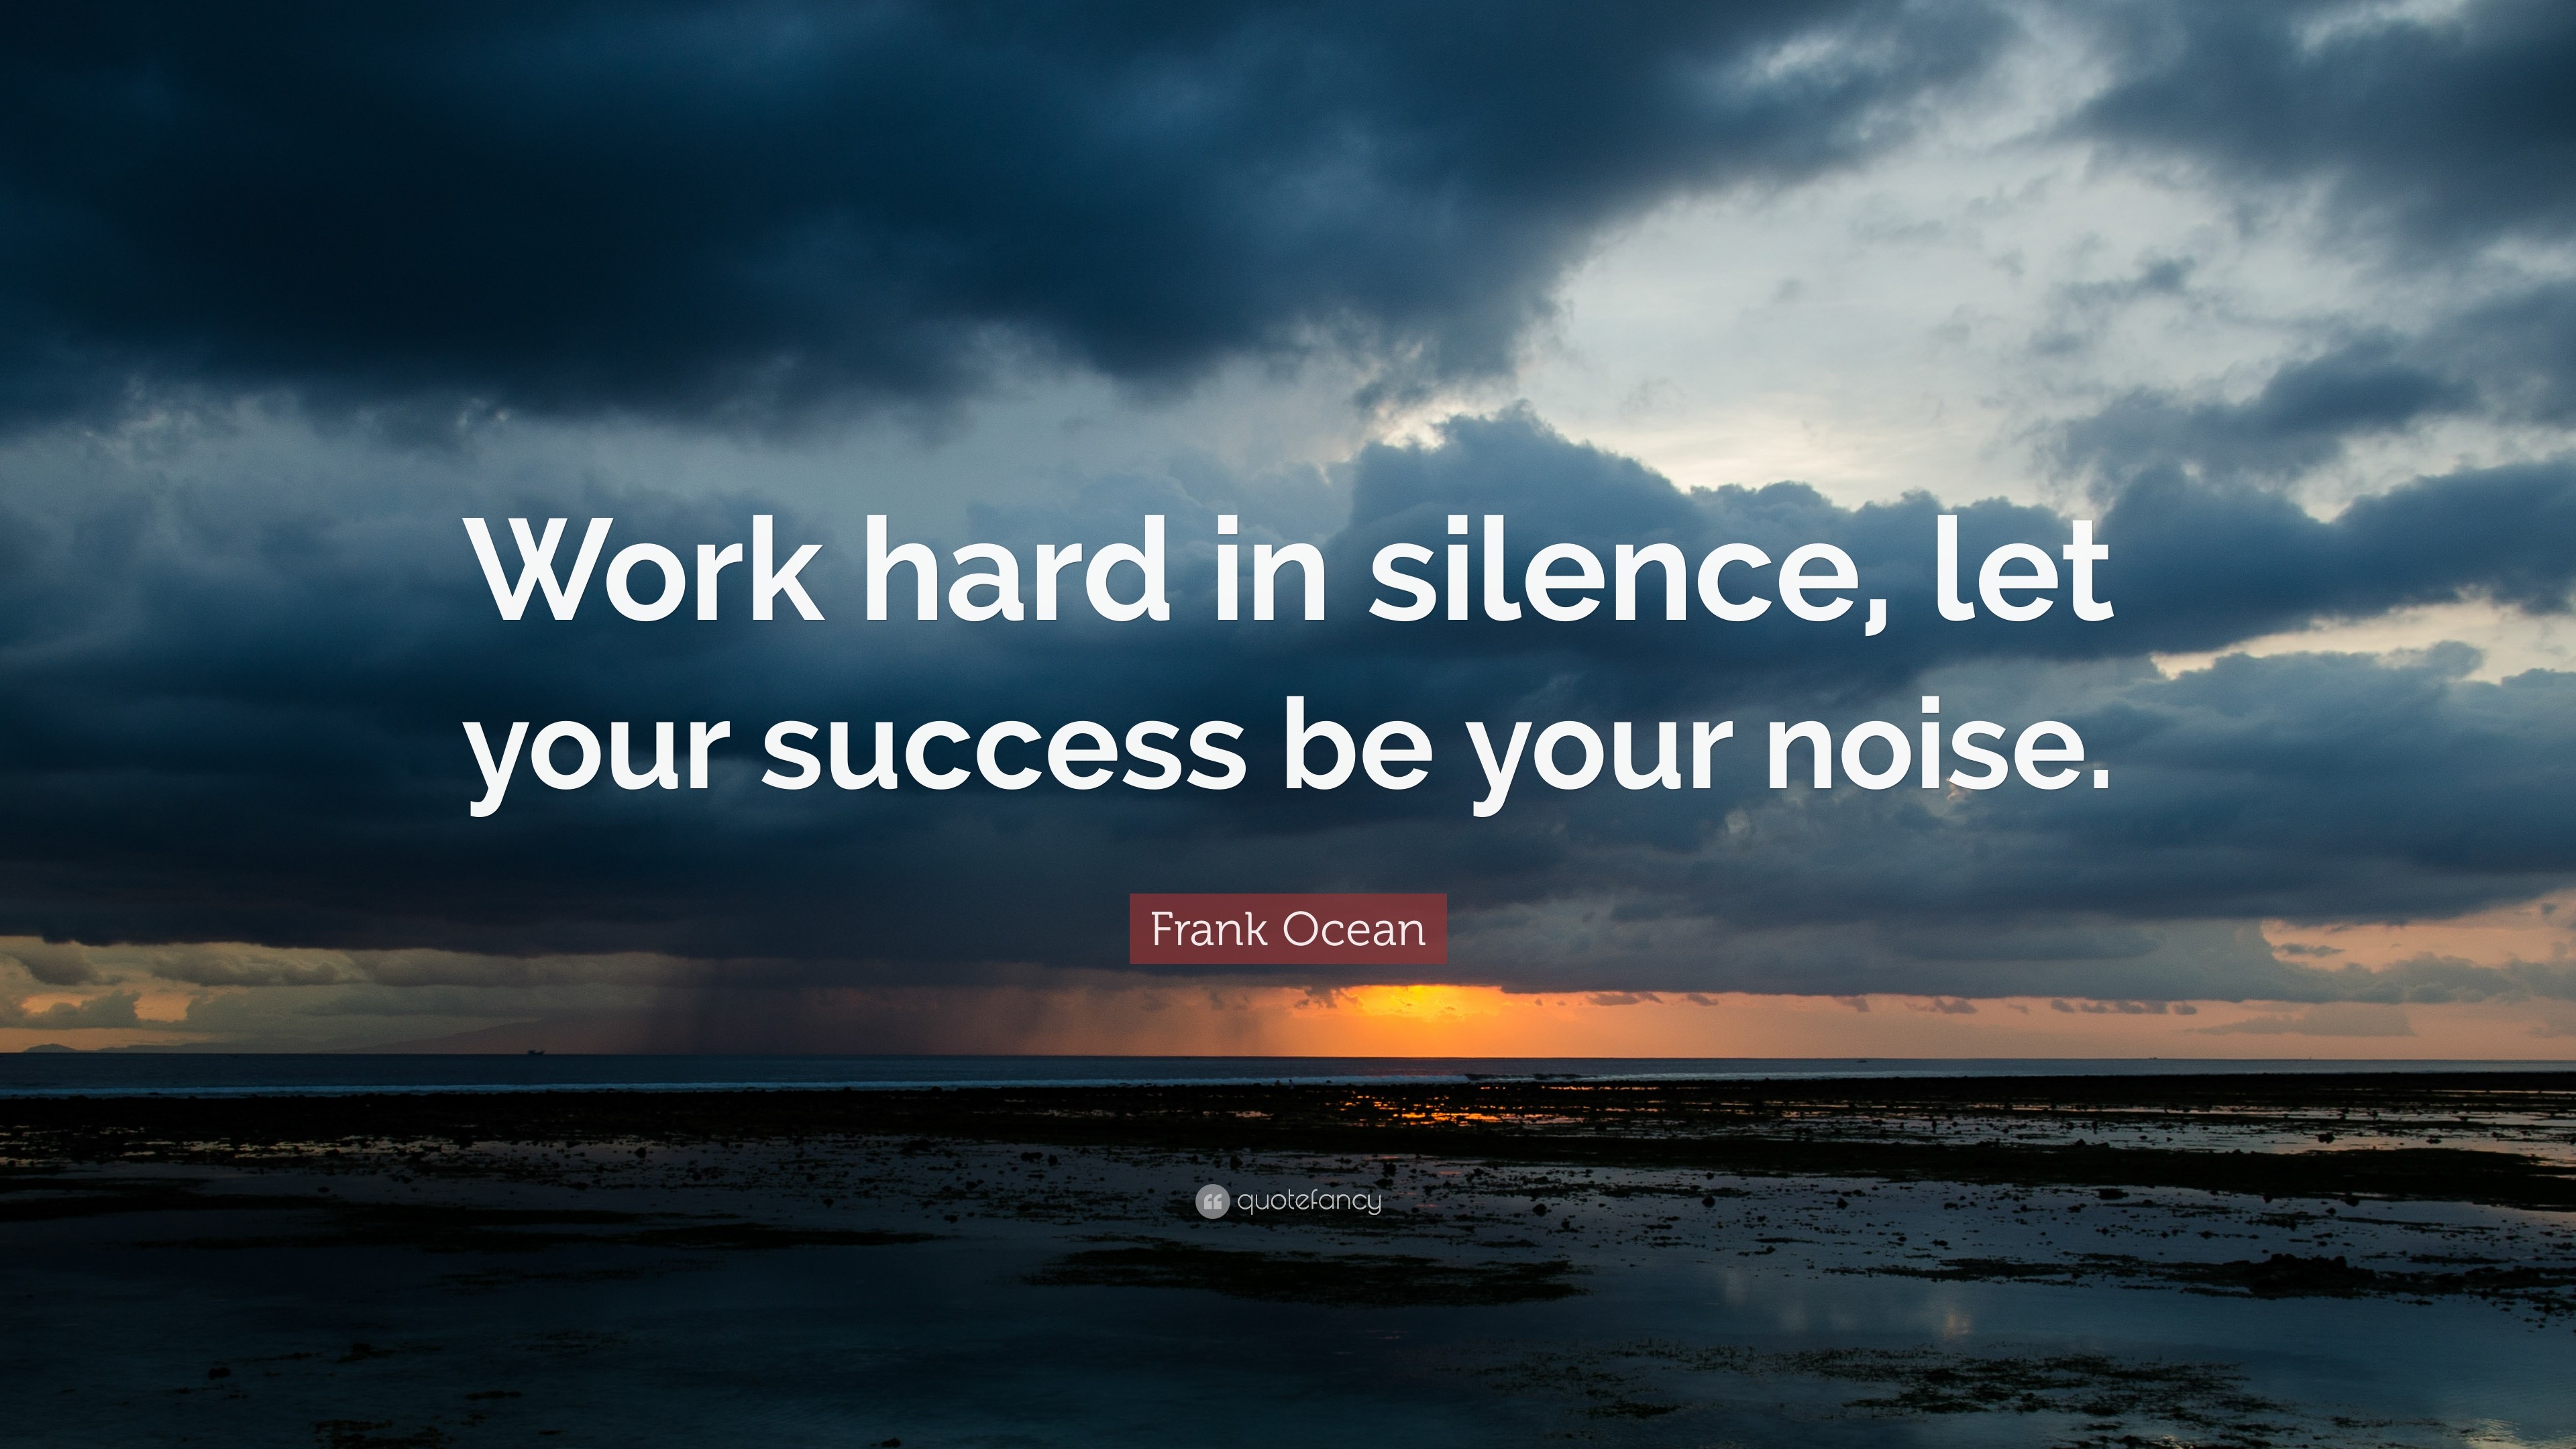 3840x2160 Frank Ocean Quote: “Work hard in silence, let your success be your noise